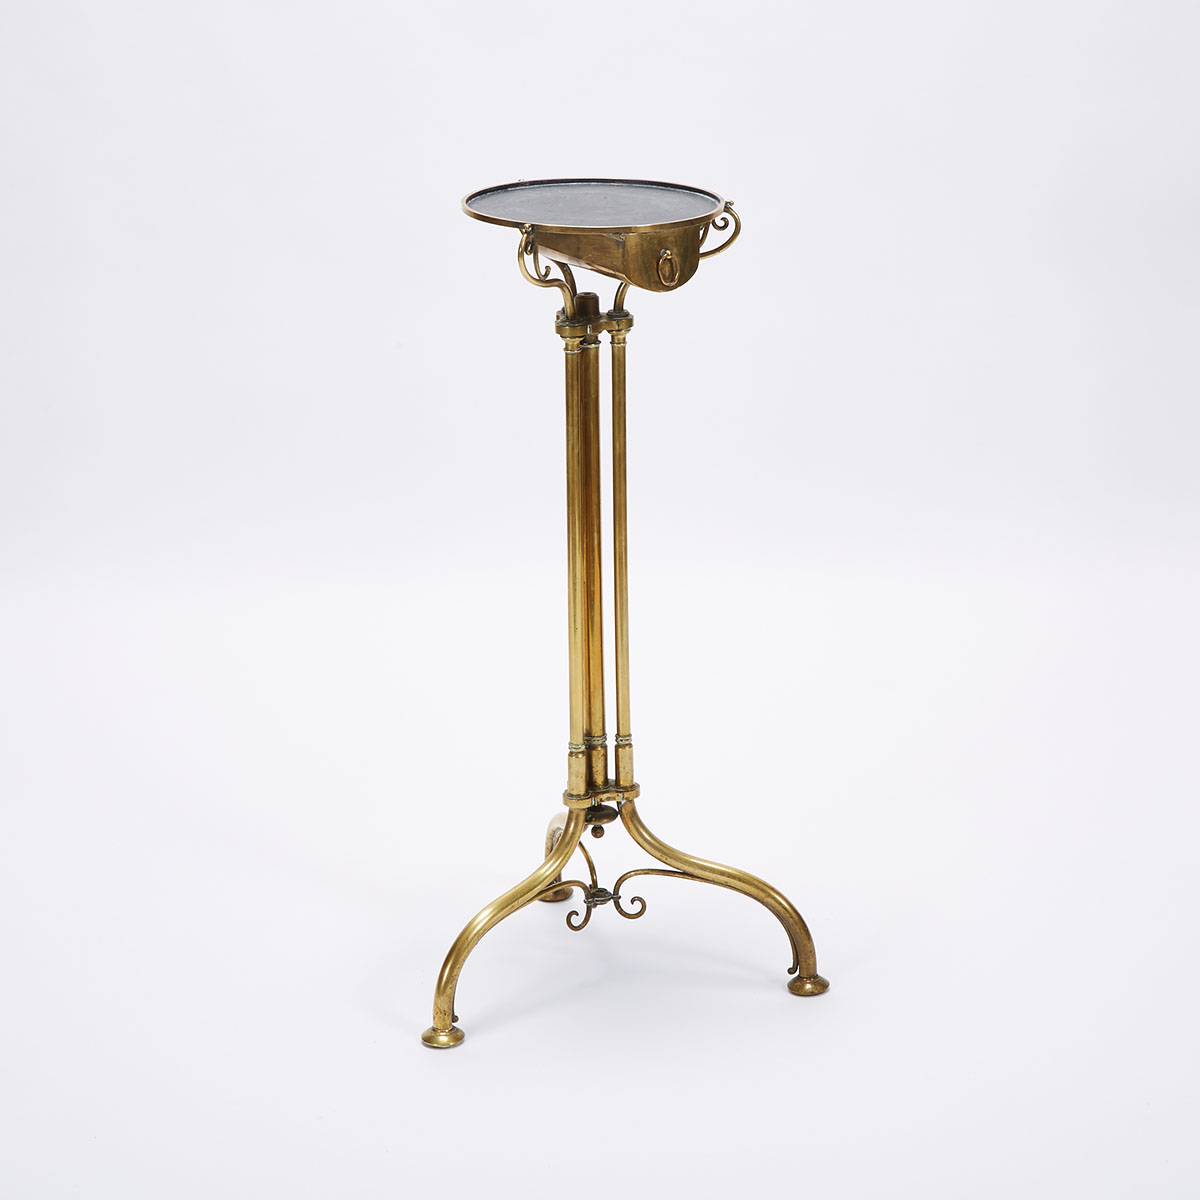 Early Victorian Brass Candlestand with Drawer, mid 19th century